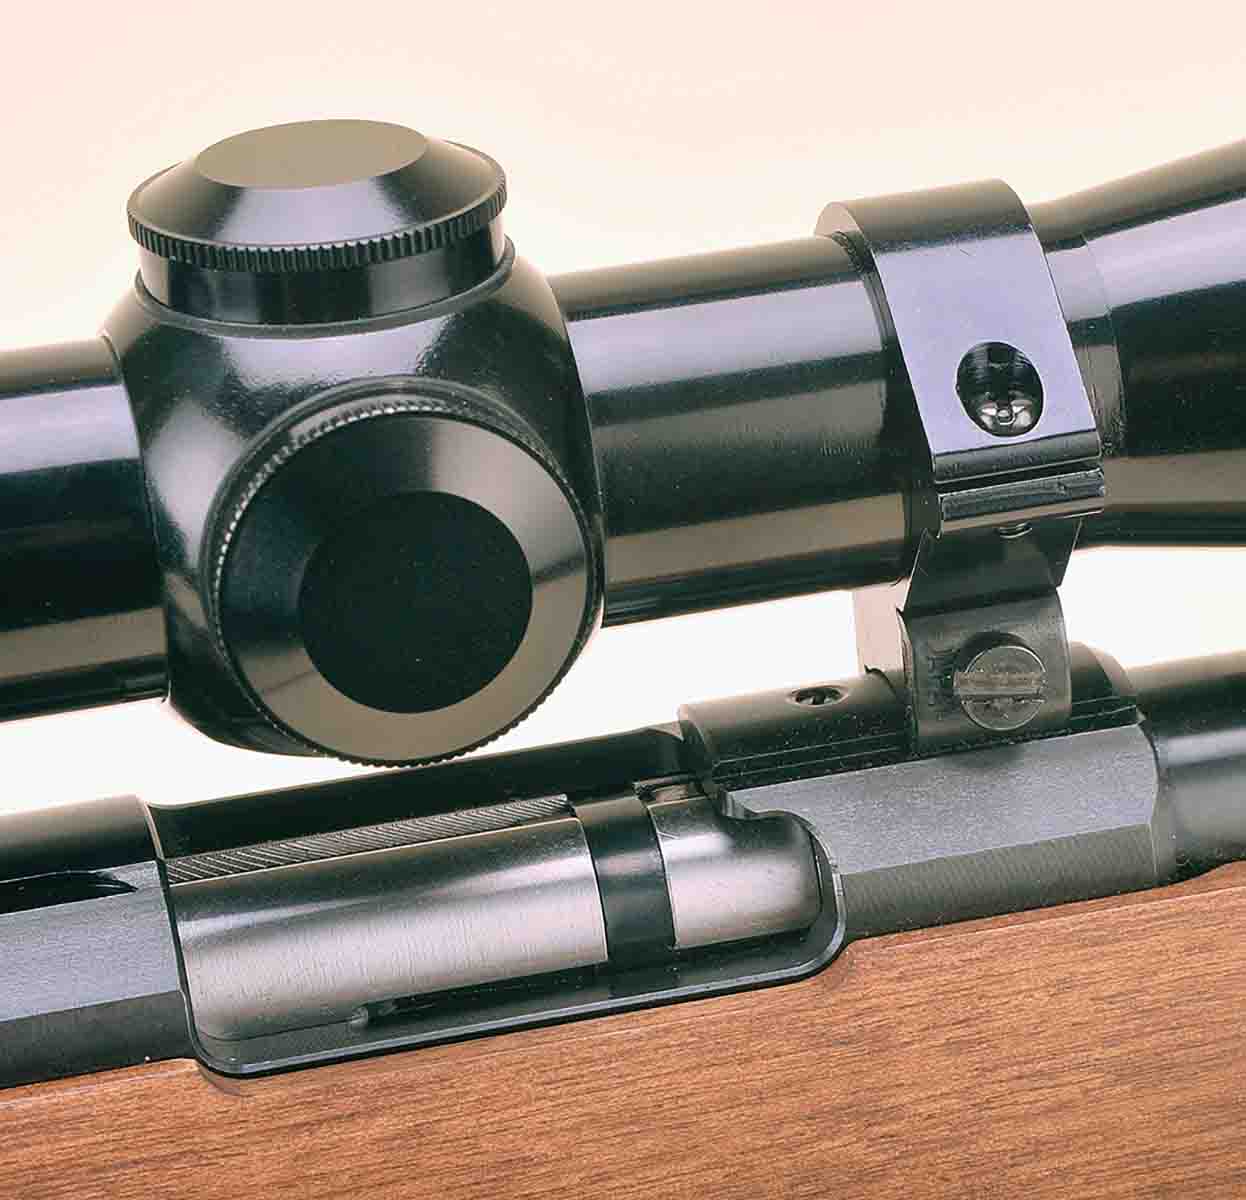 The rifle operated smoothly and can be used with both open and optical sights.